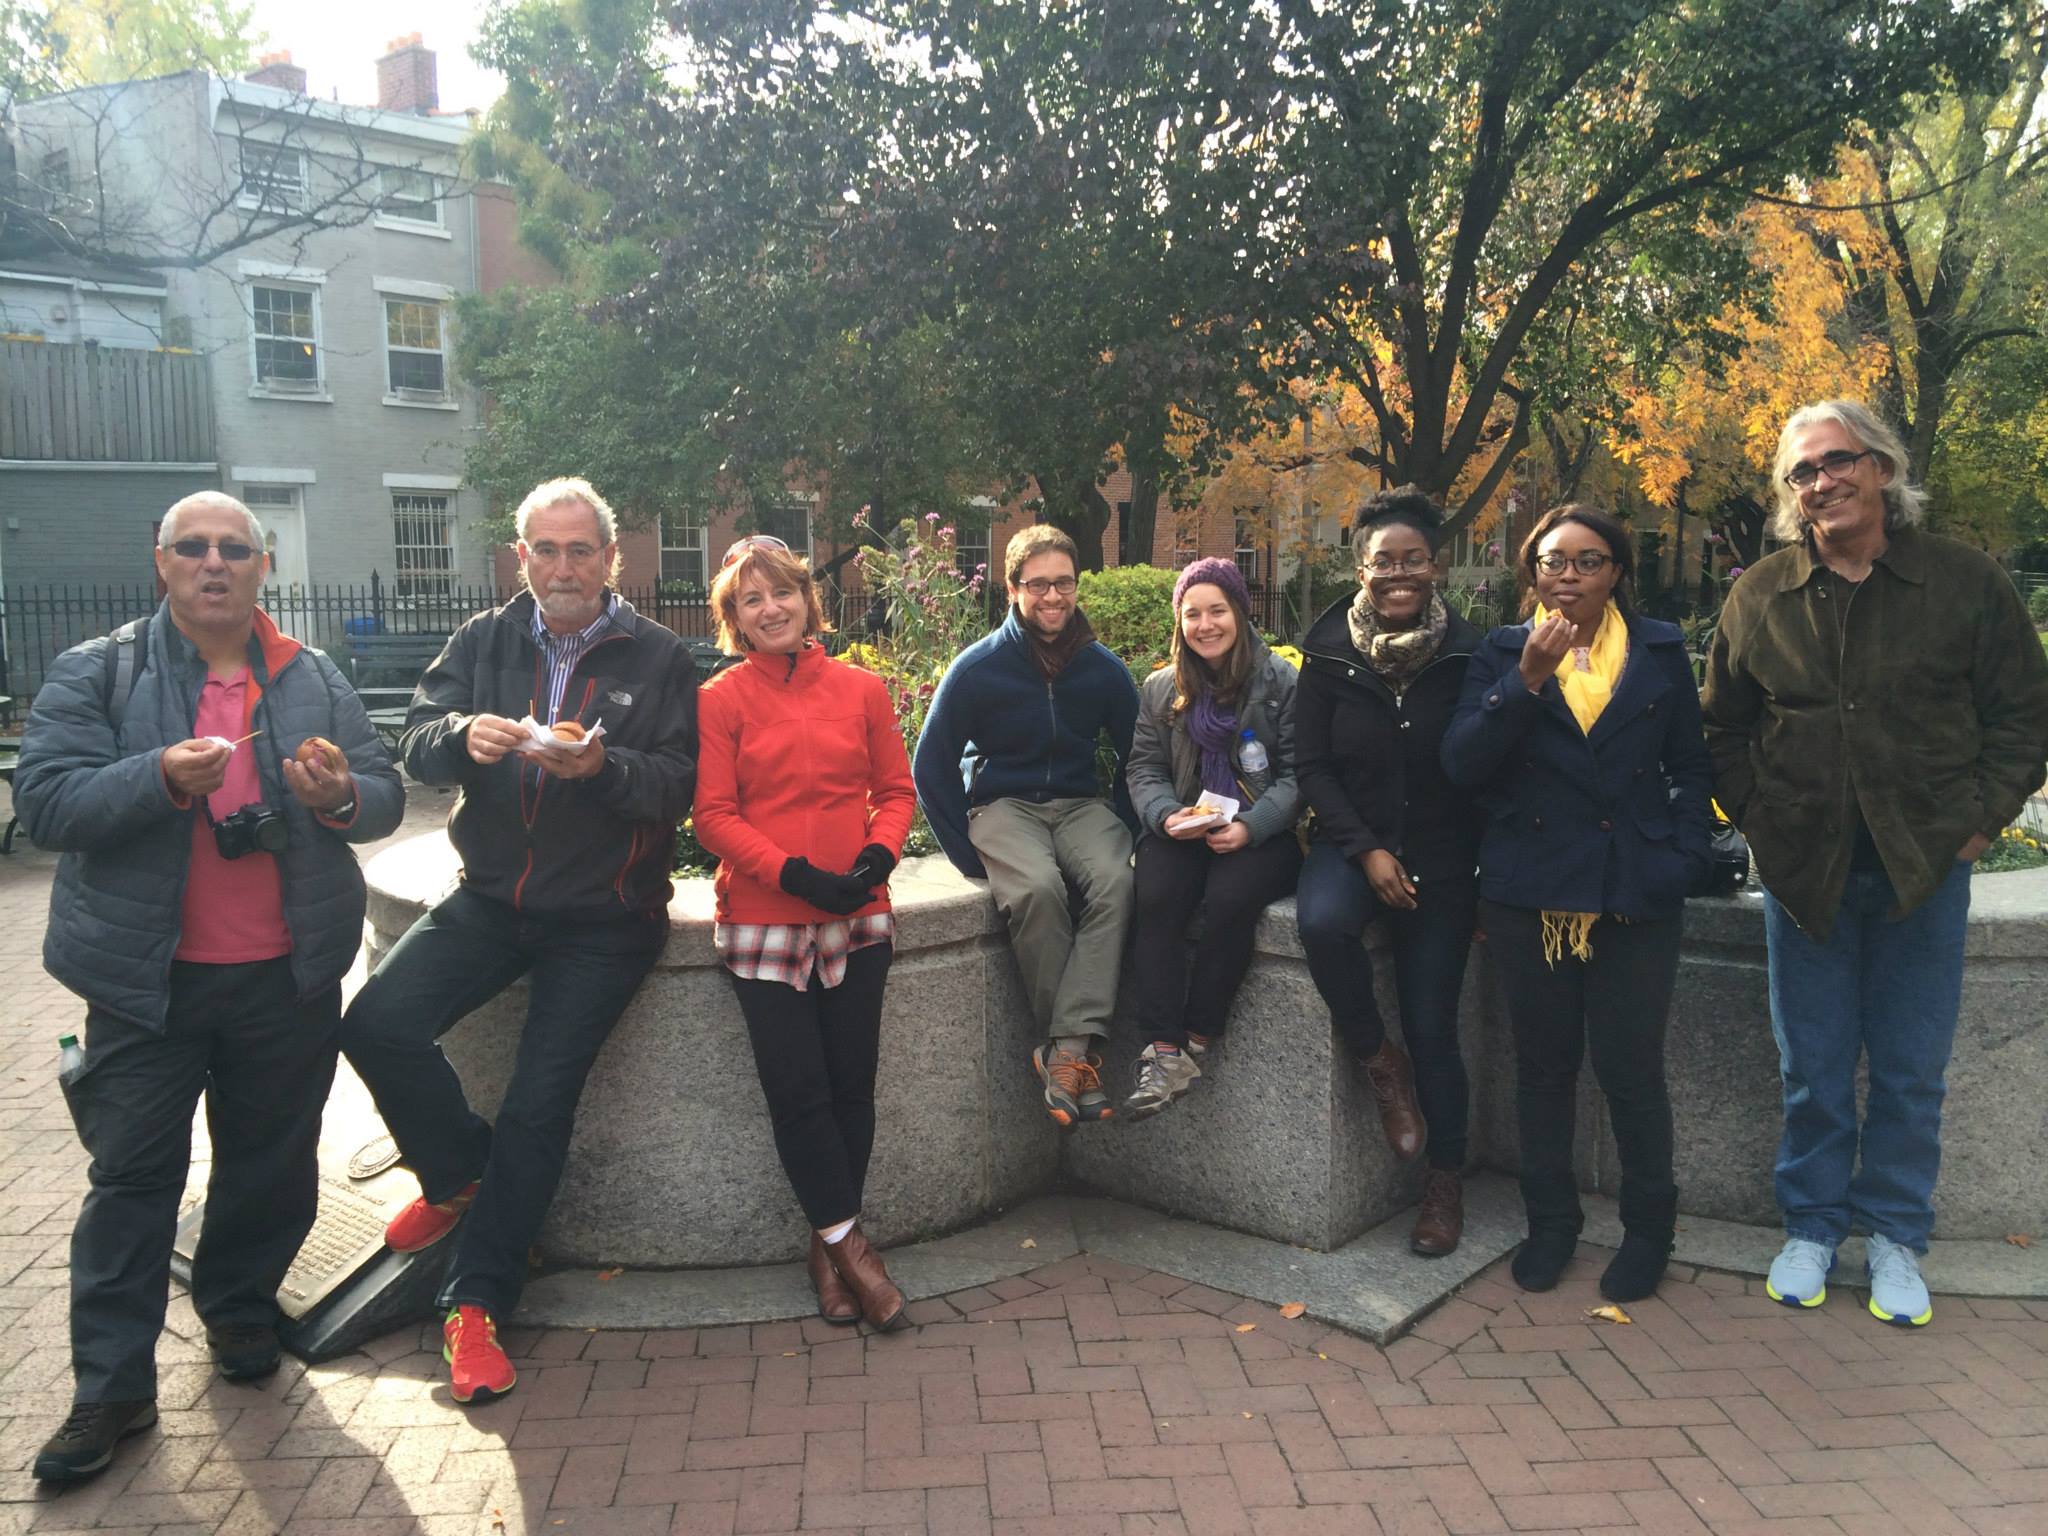 An Urban Oyster tour group on a Brownstone Brooklyn tour.